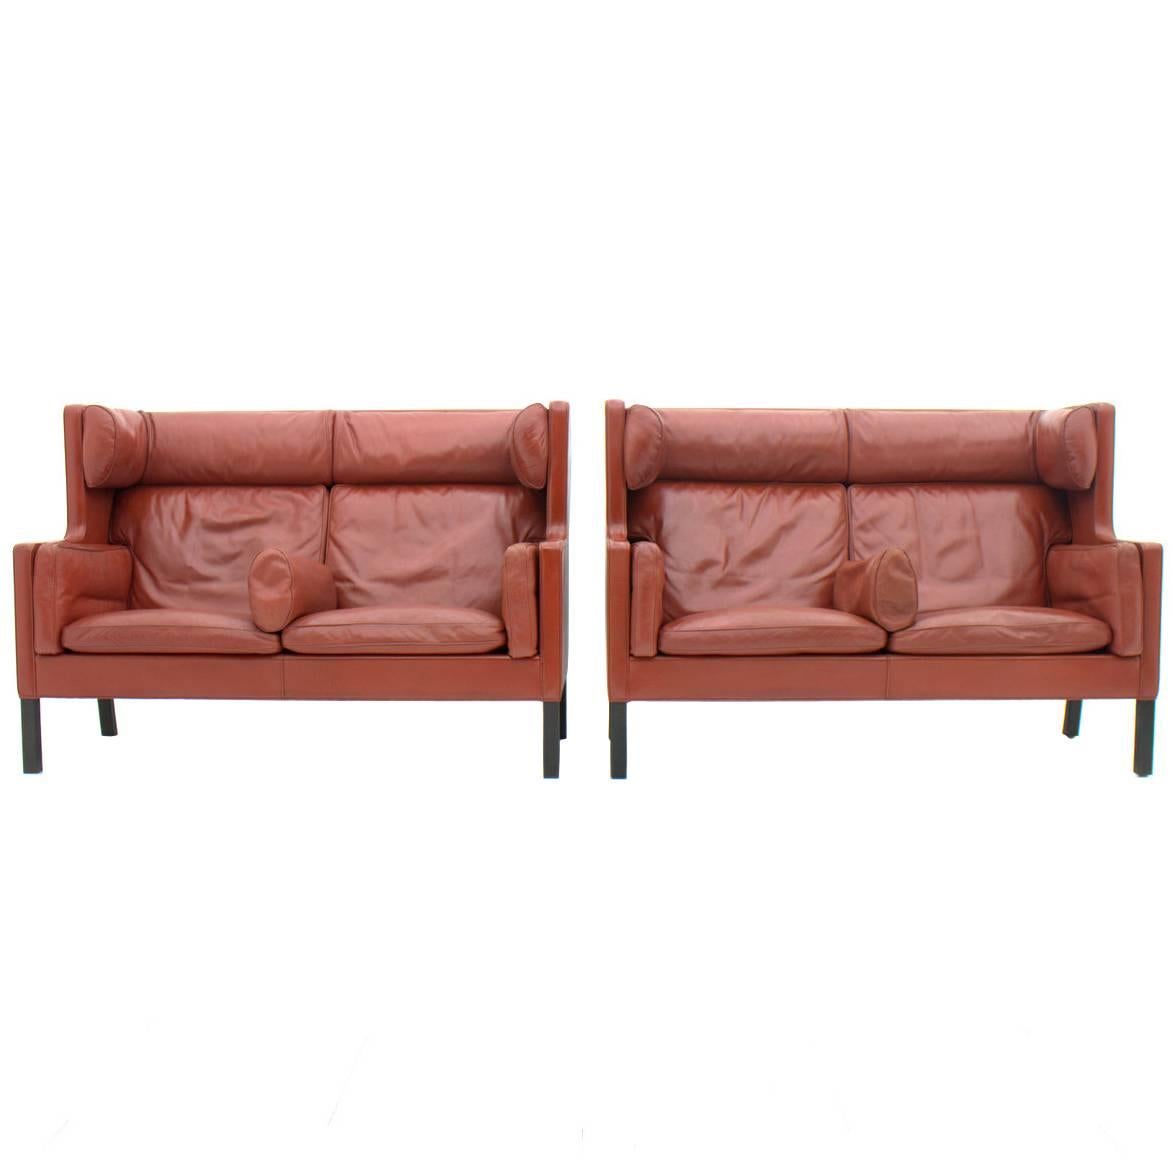 One of Two Børge Mogensen Coupe Leather Sofa, 2192, Frederica, Denmark 1971